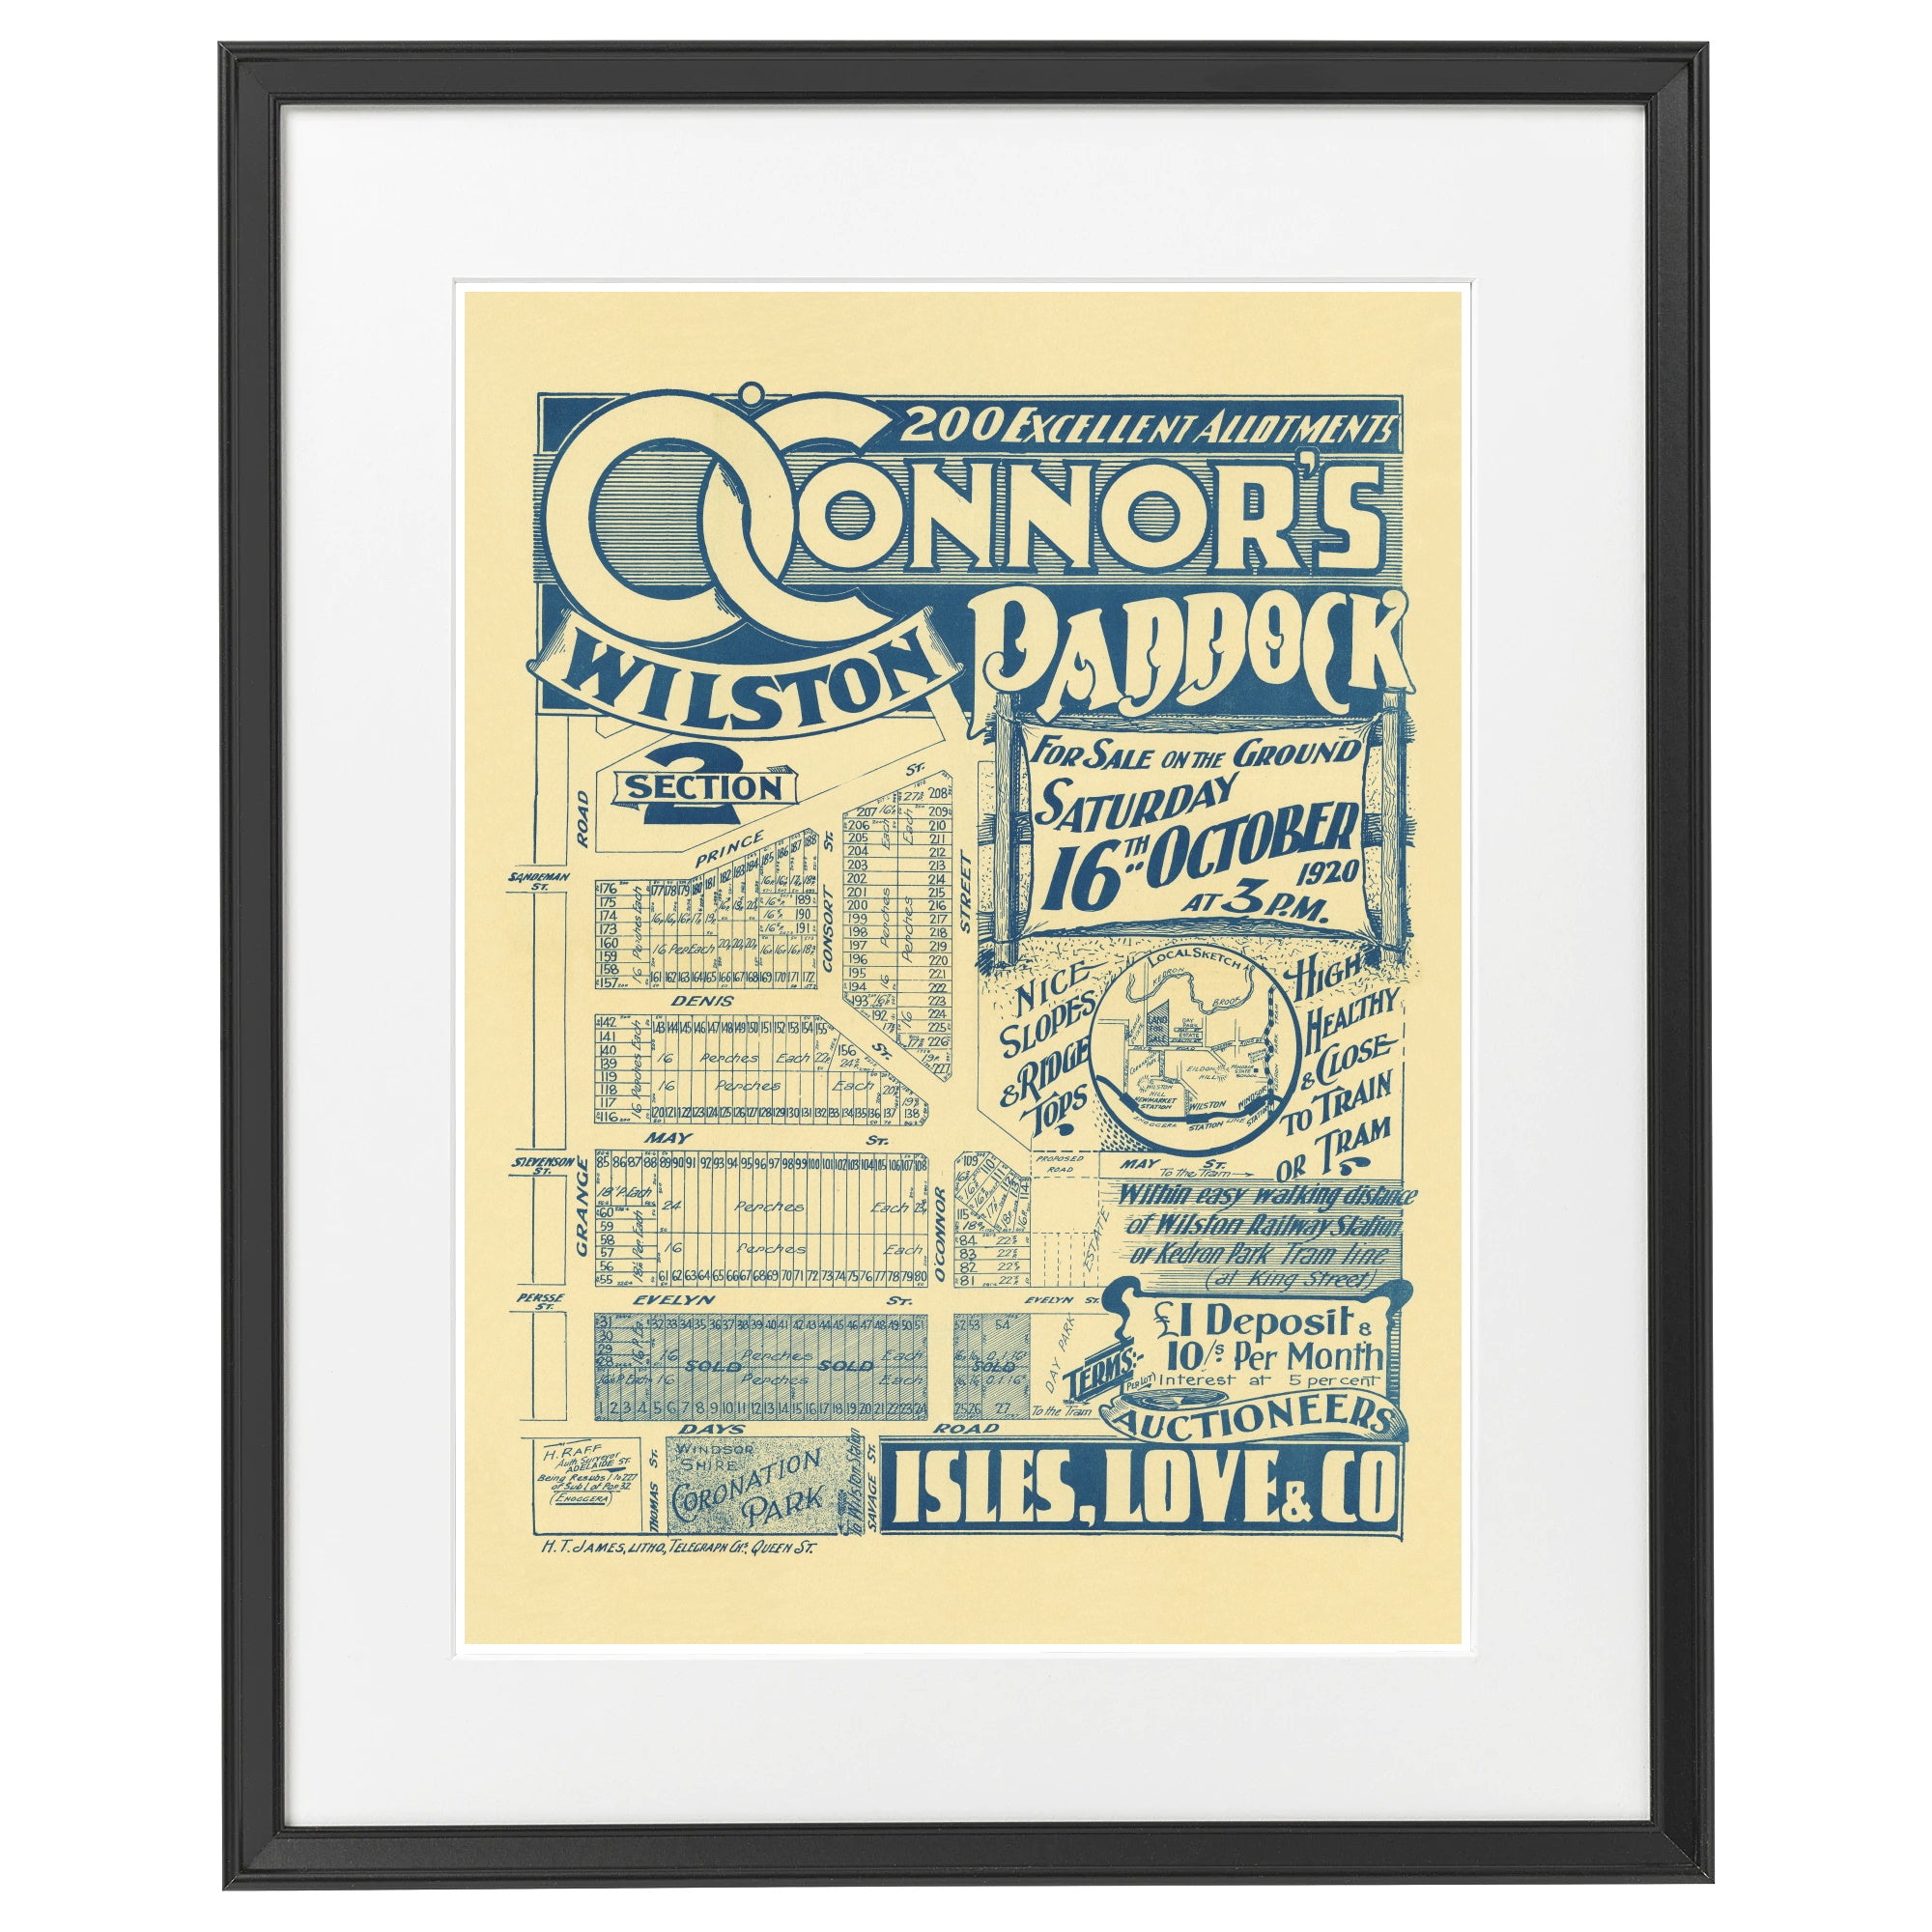 100 years old today - O'Connor's Paddock - Section 2 - Grange